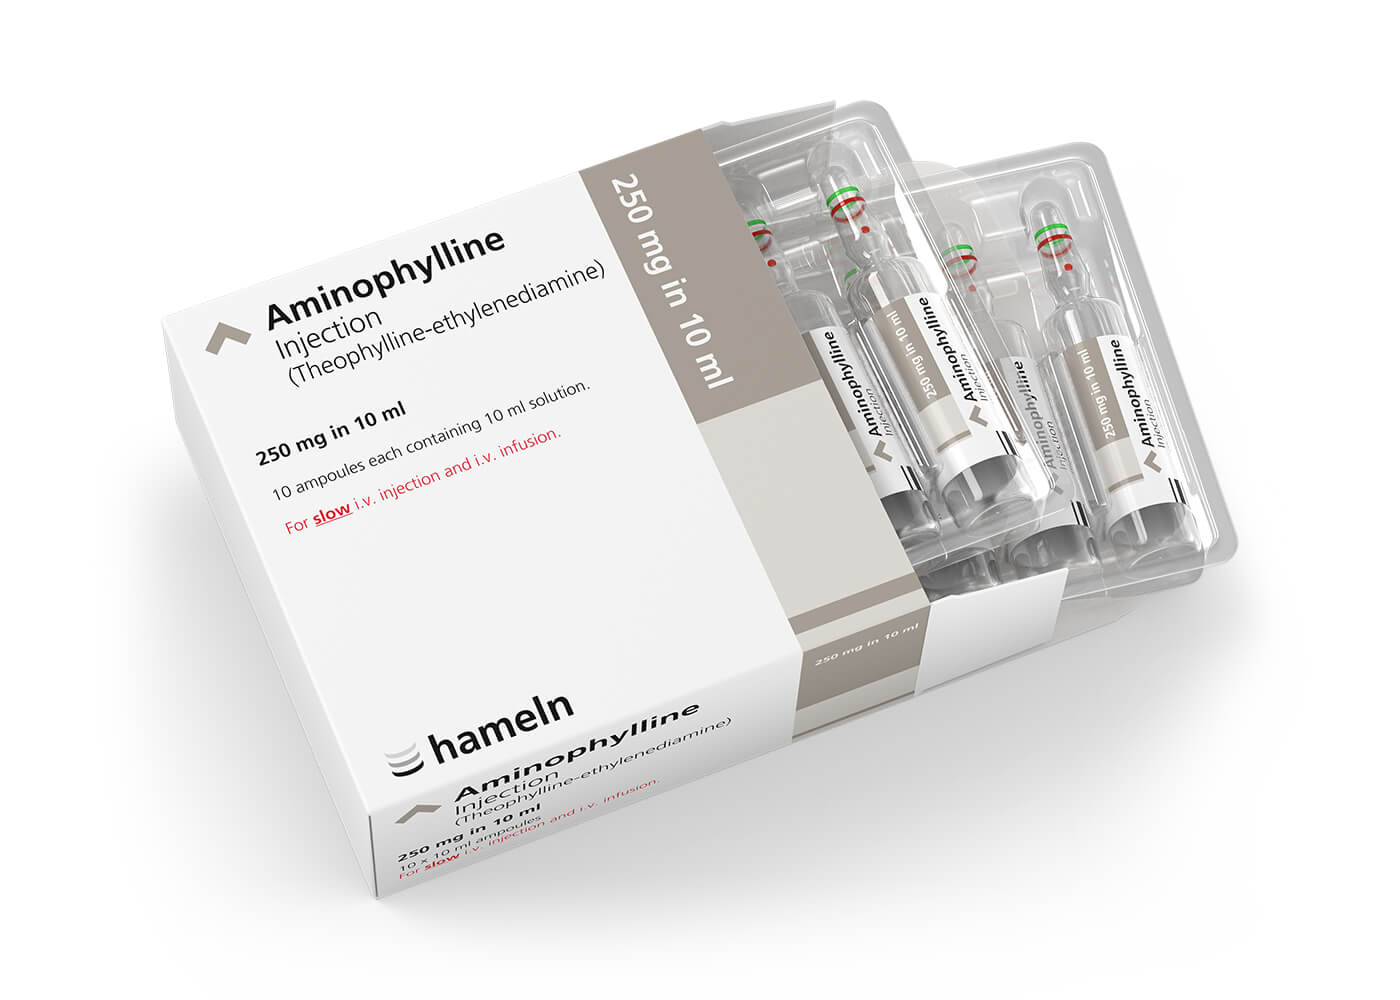 Aminophylline_UK_250_mg-ml_in_10_ml_Pack+Amp_10St_2020-04(1)